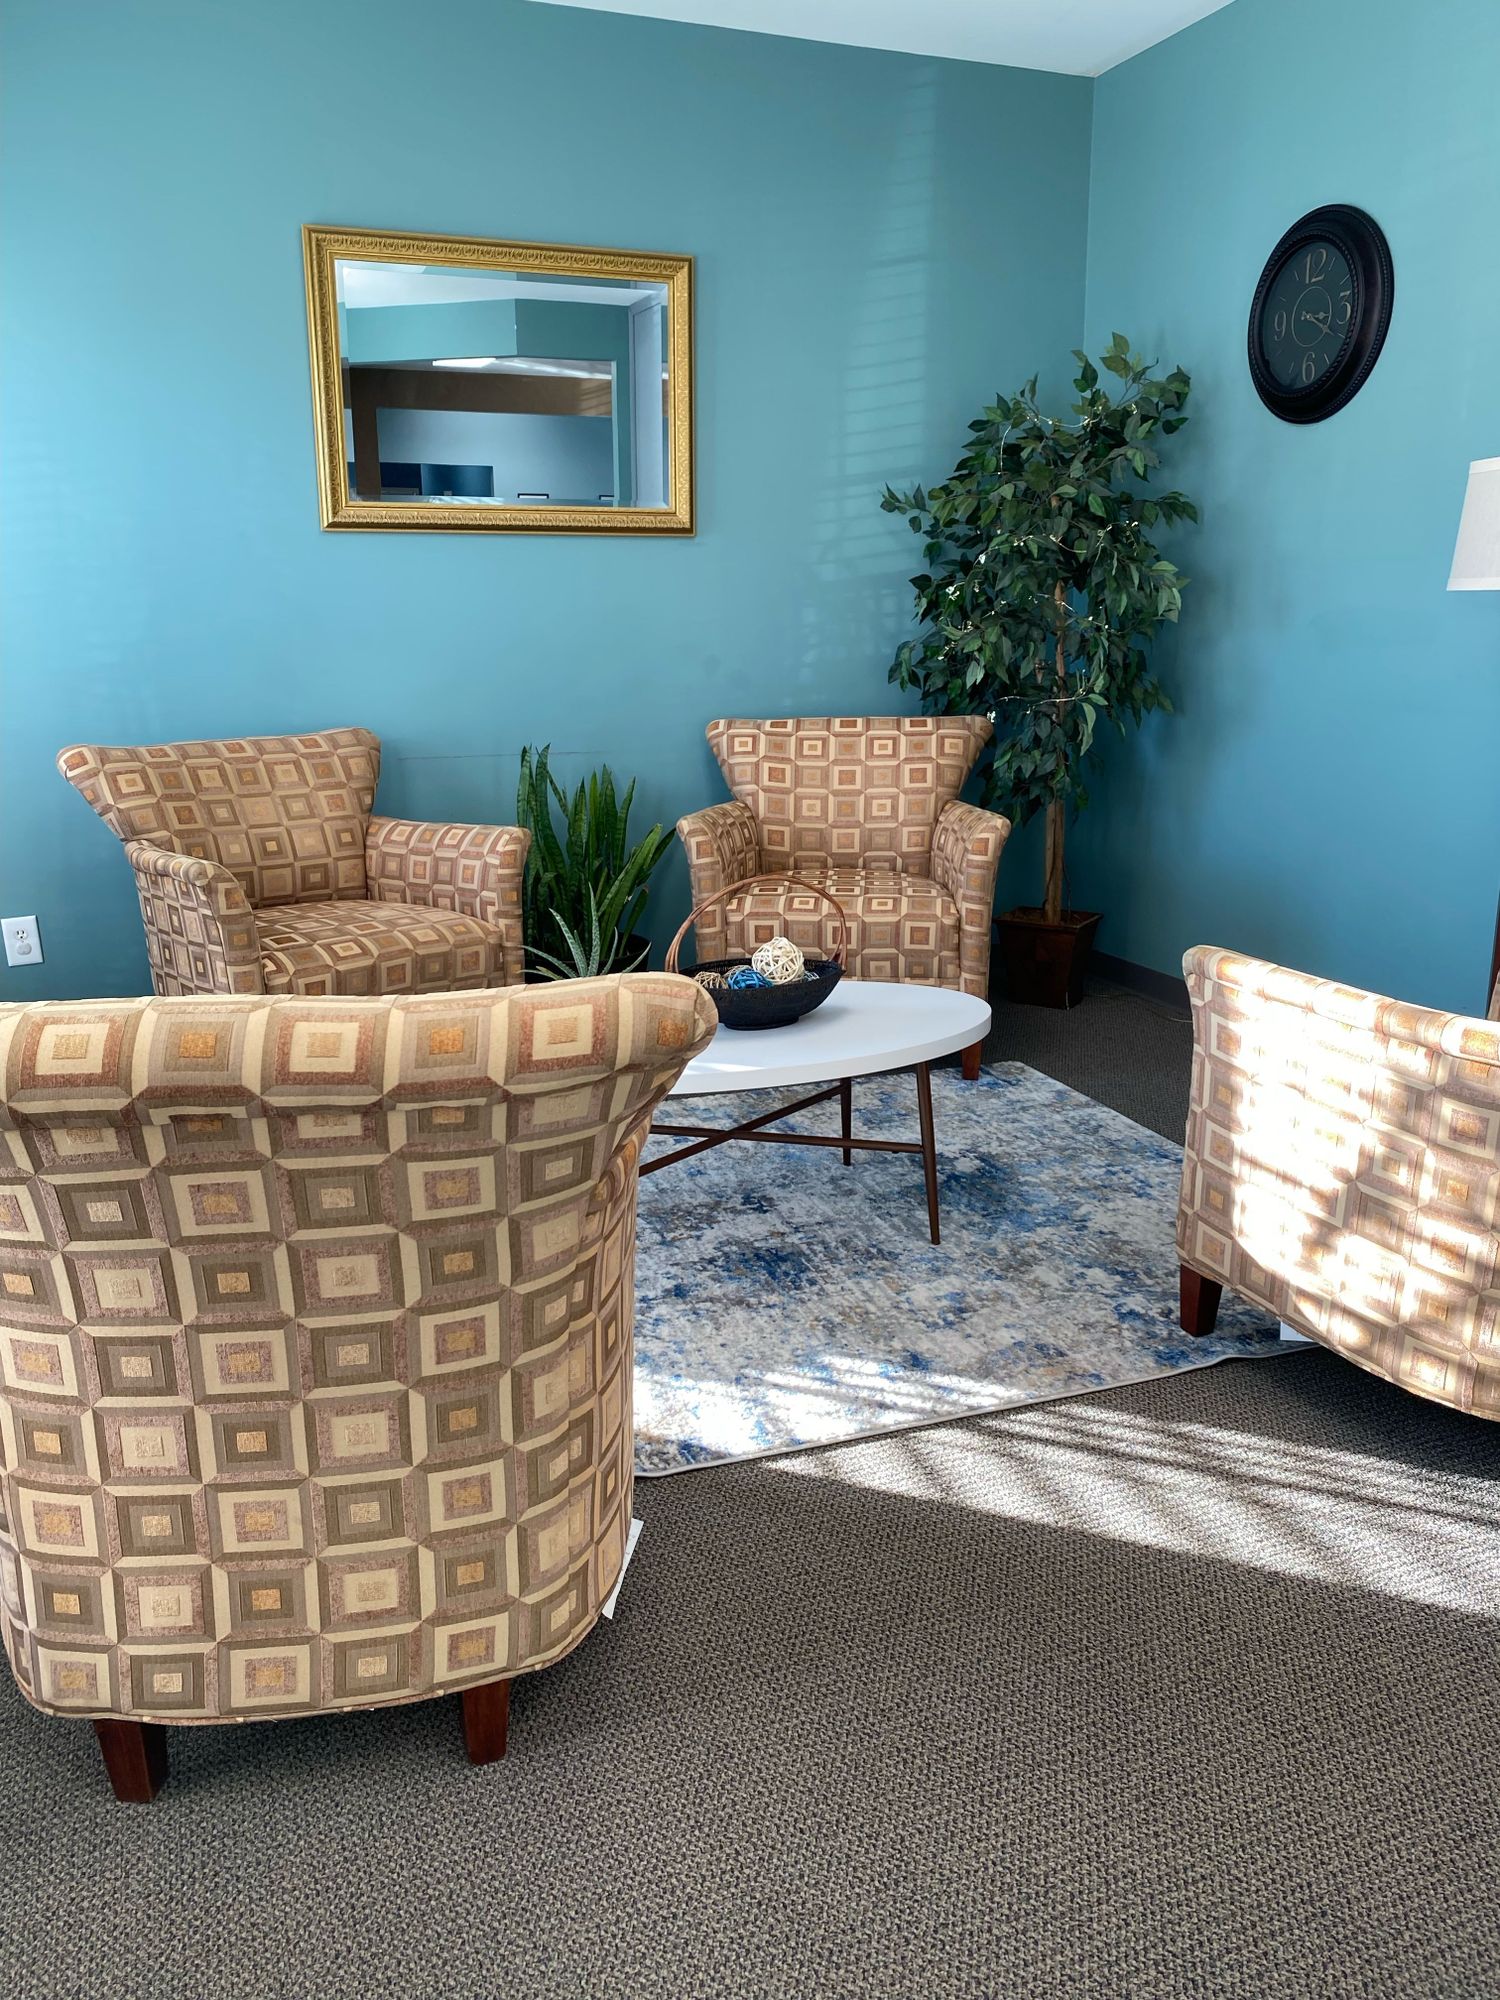 Gallery Photo of Our cozy waiting room with pretty comfortable chairs. Come in and make yourself at home.